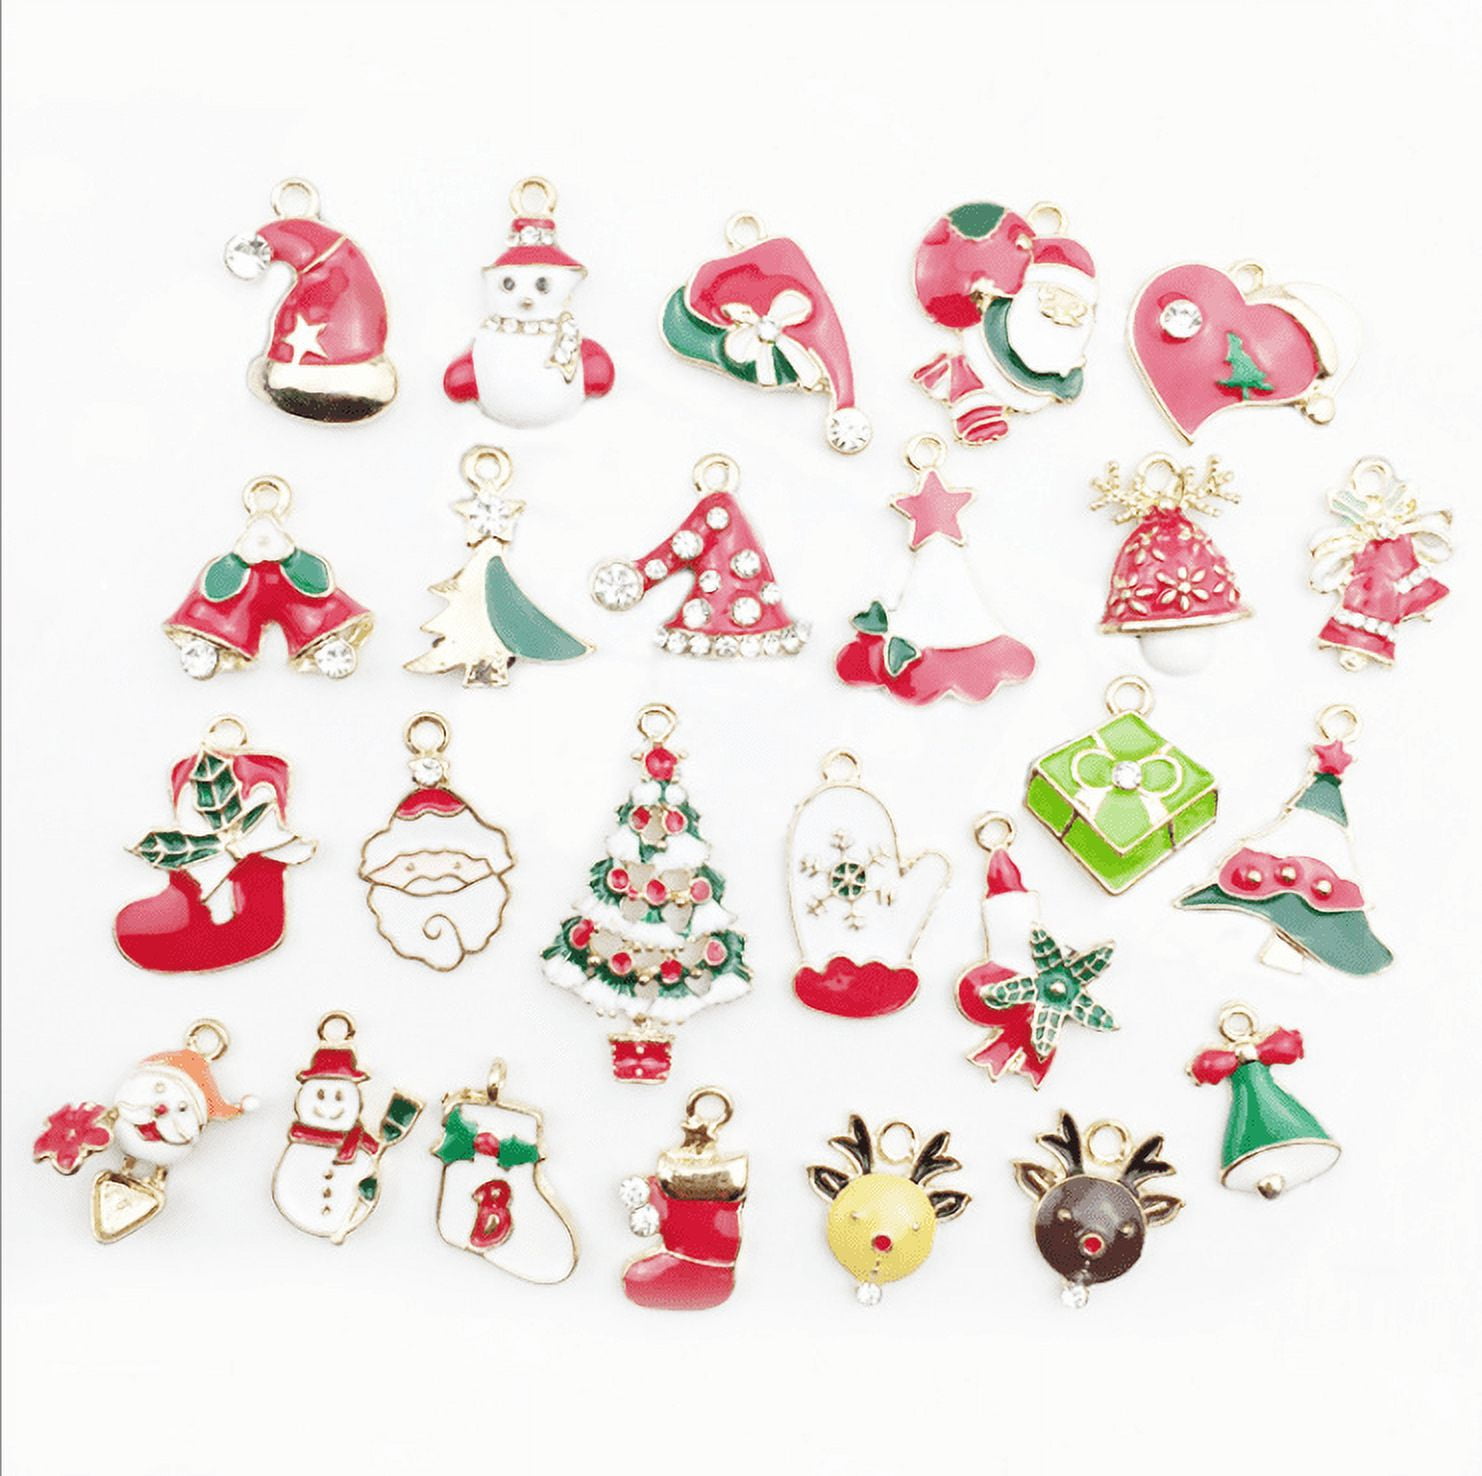 Sureio 60 Pieces Christmas Gingerbread Charm Bracelet Charms DIY Crafts Earring Making Charms Jewelry Pendants Decorative Charms for Necklace (White